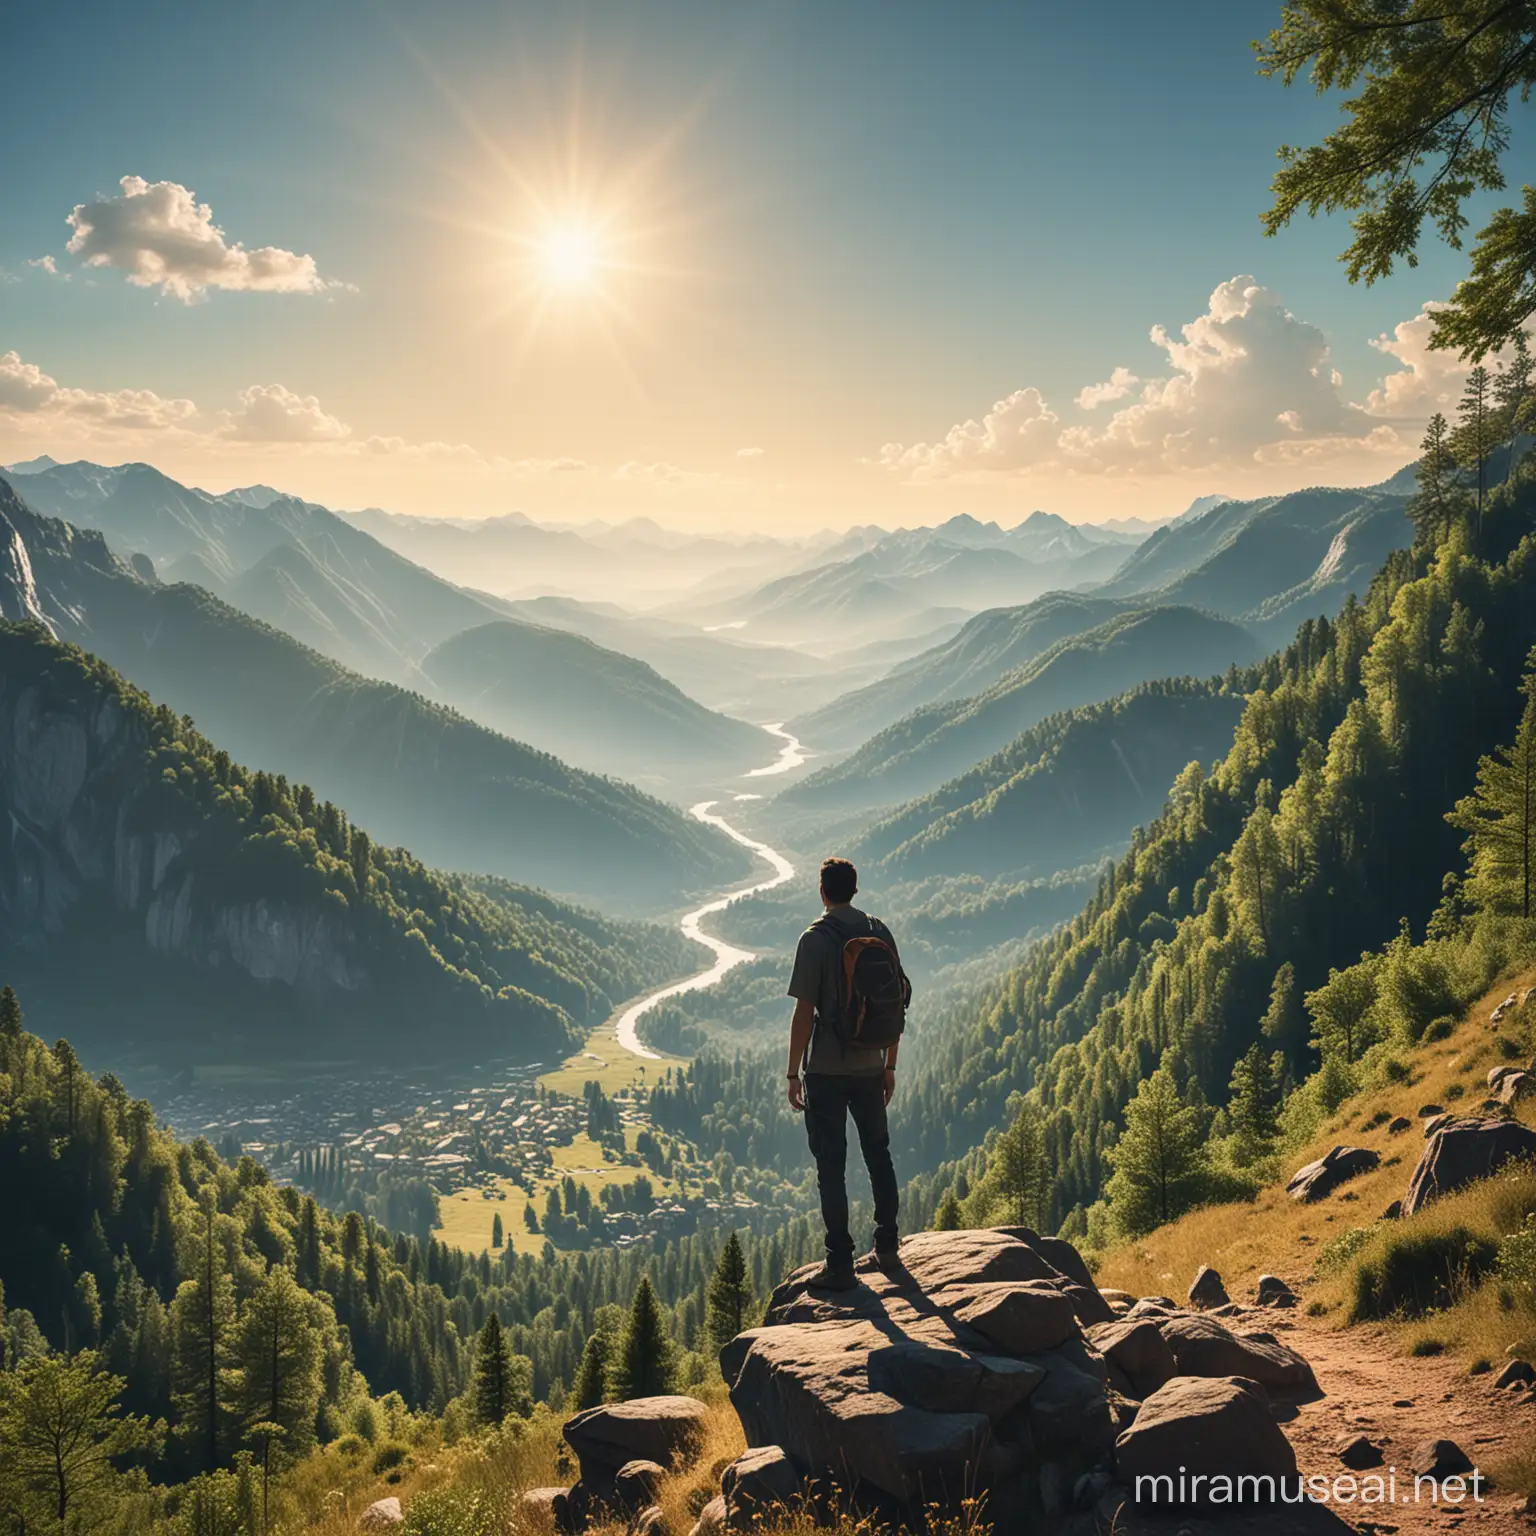 a man staring into a future world in the forest free from work with mountain in the background and he is hiking and its a very sunny day and in the distance you can see a city
